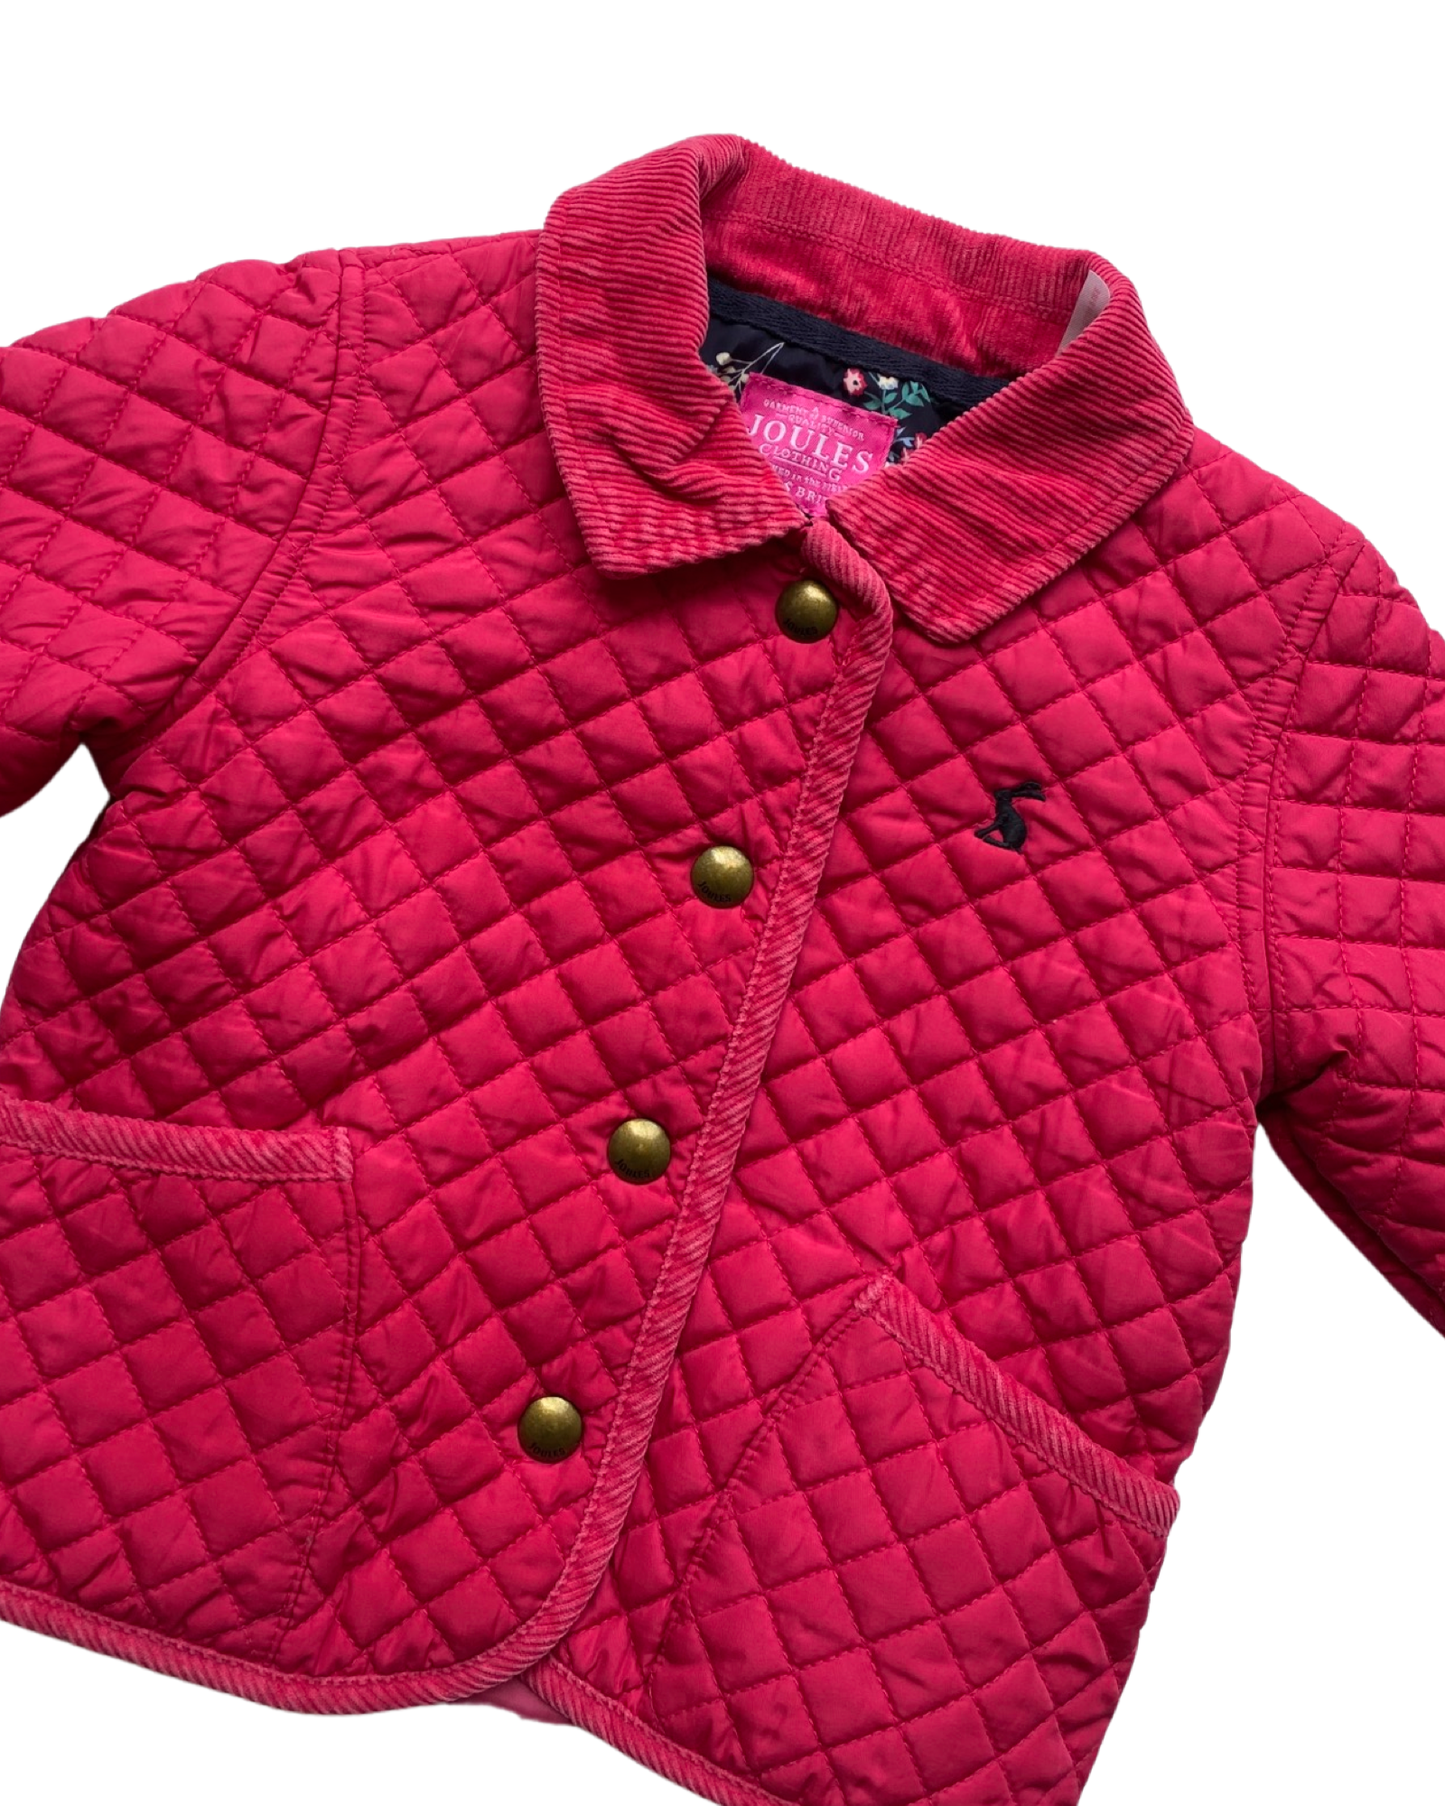 Joules pink quilted baby jacket (12-18mths)